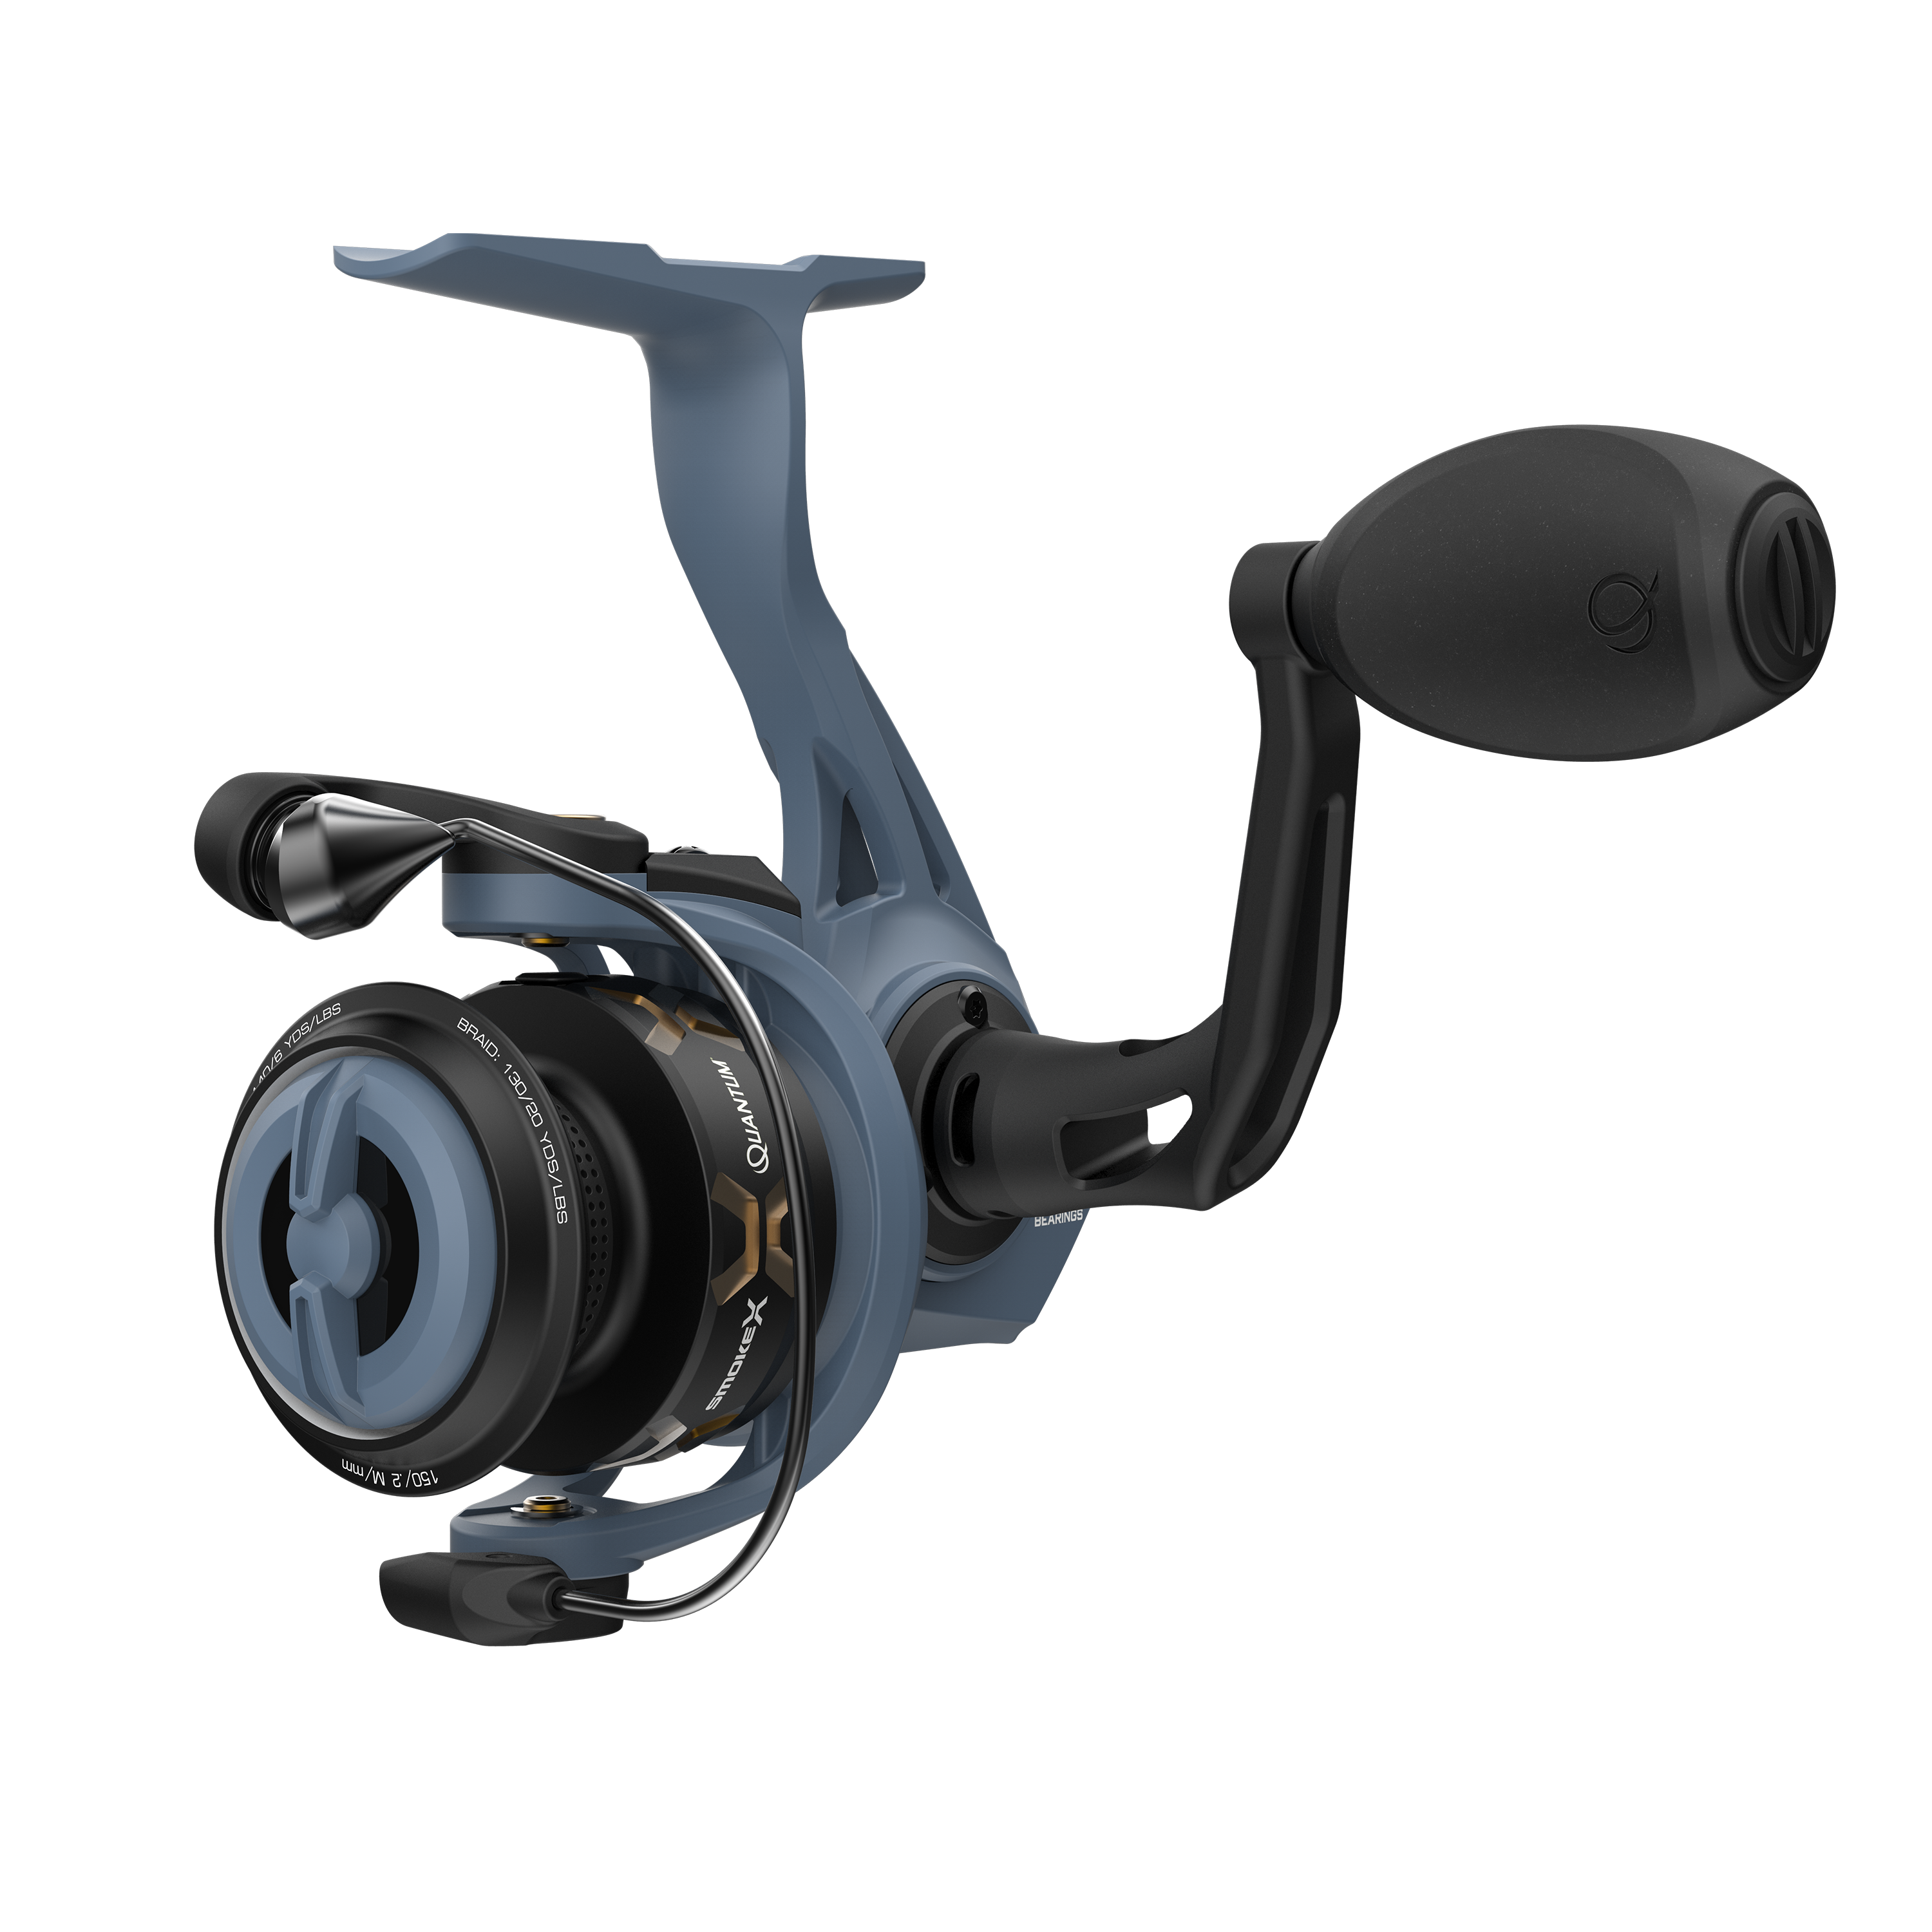 Quantum Smoke X Baitcast Fishing Reel, Size 100 Reel, Left-Hand Retrieve,  Oversized Non-Slip Handle Knobs and Continuous Anti-Reverse Clutch, One